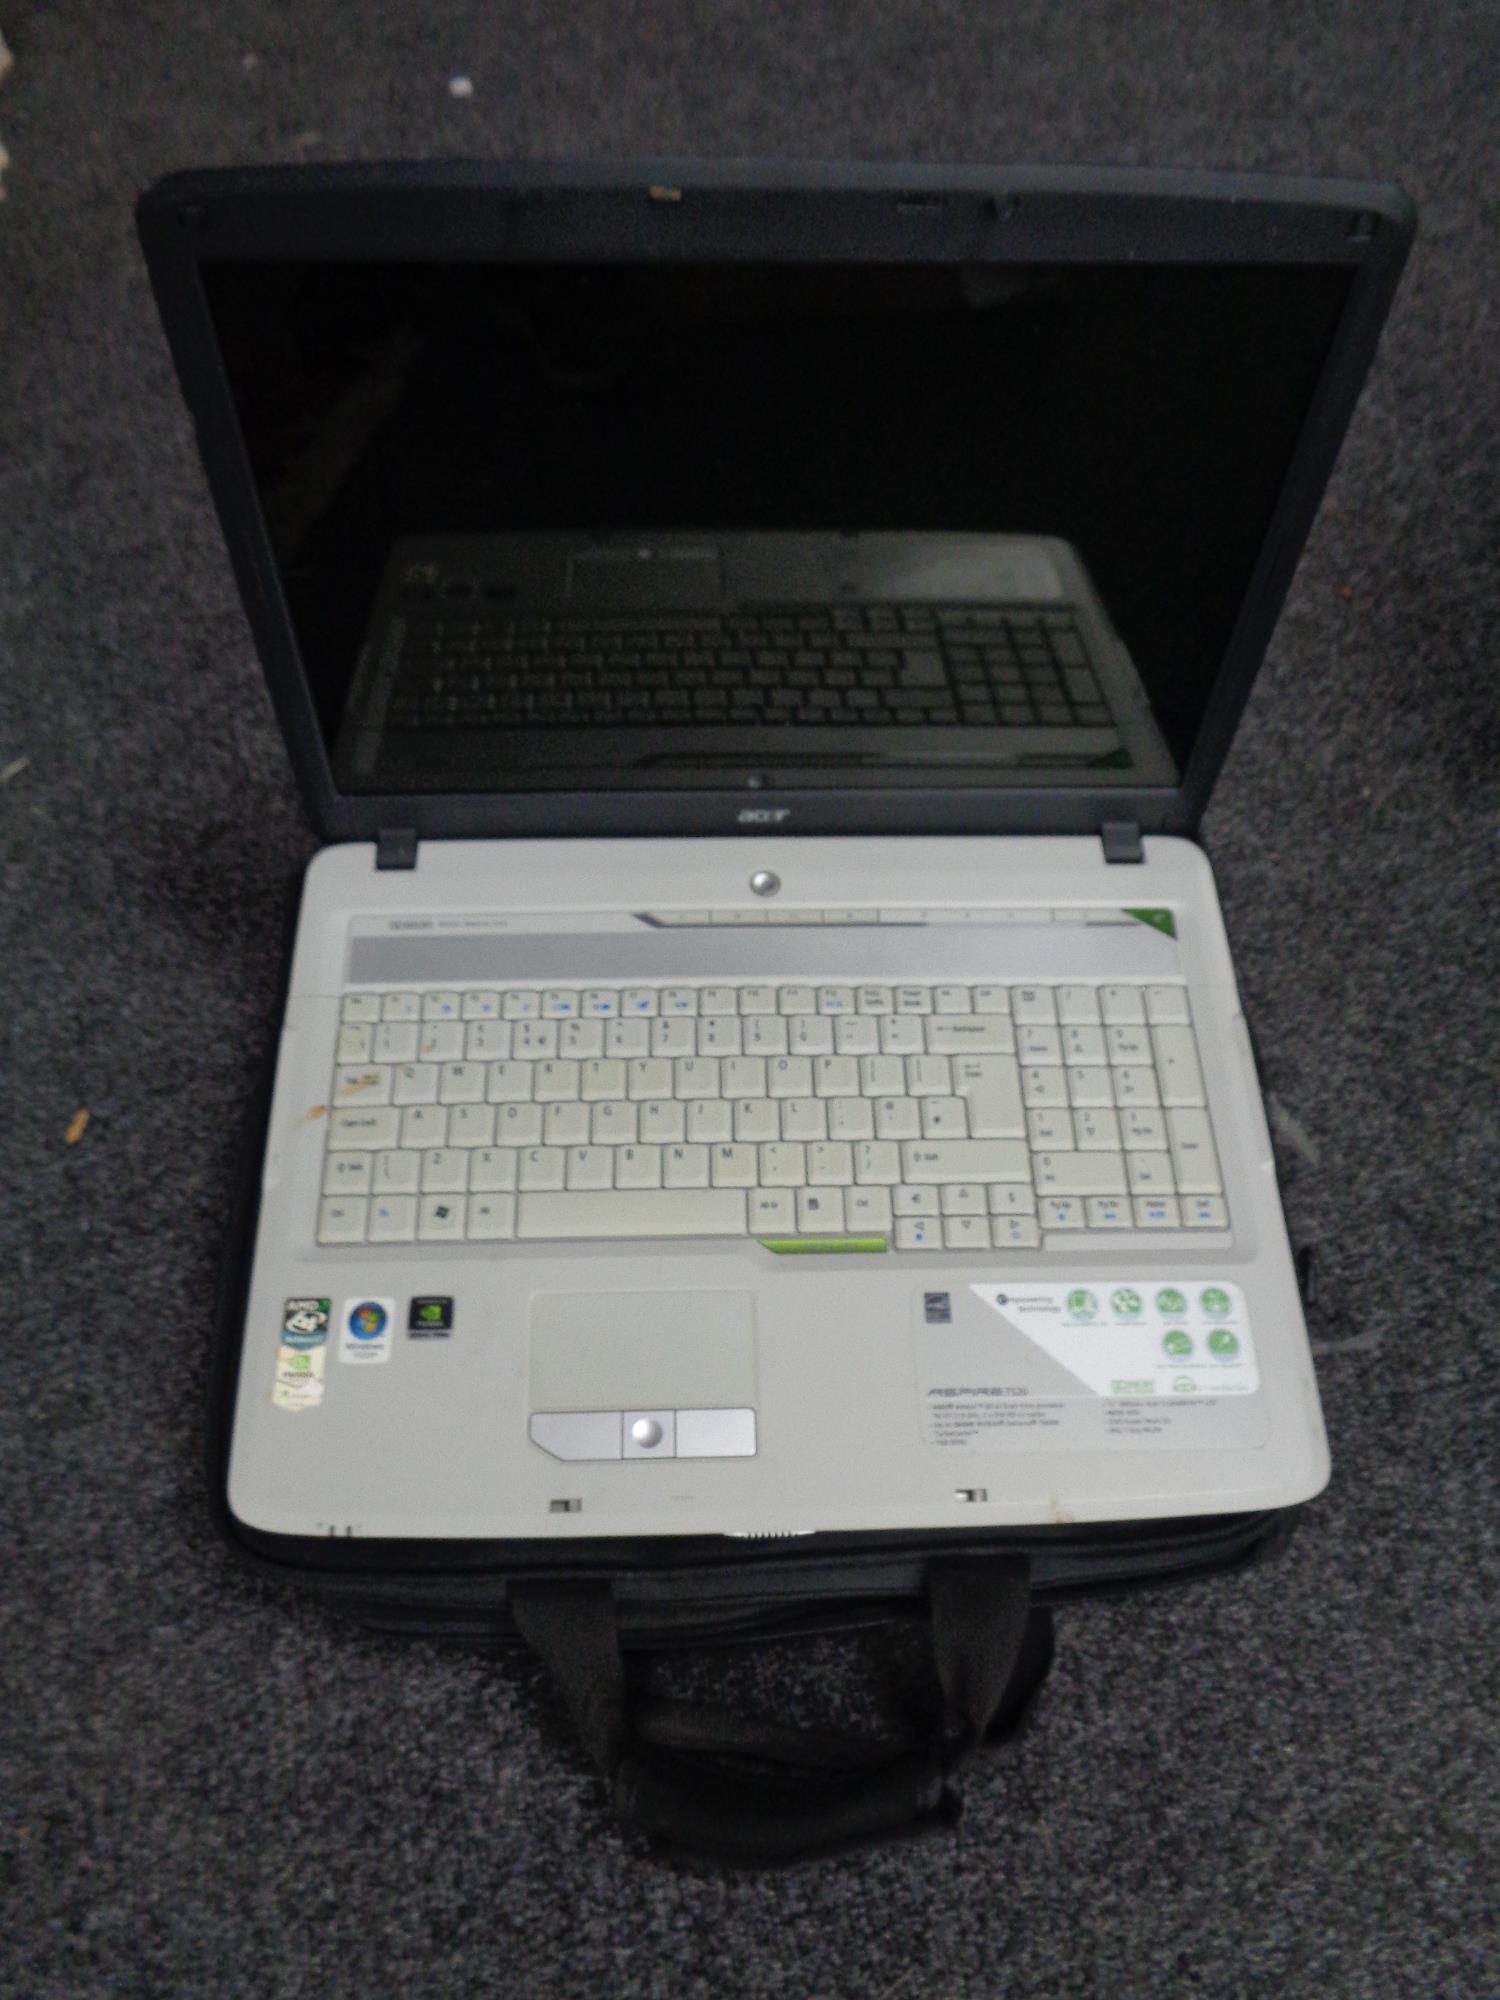 An Acer Aspire 7520 laptop in carry bag